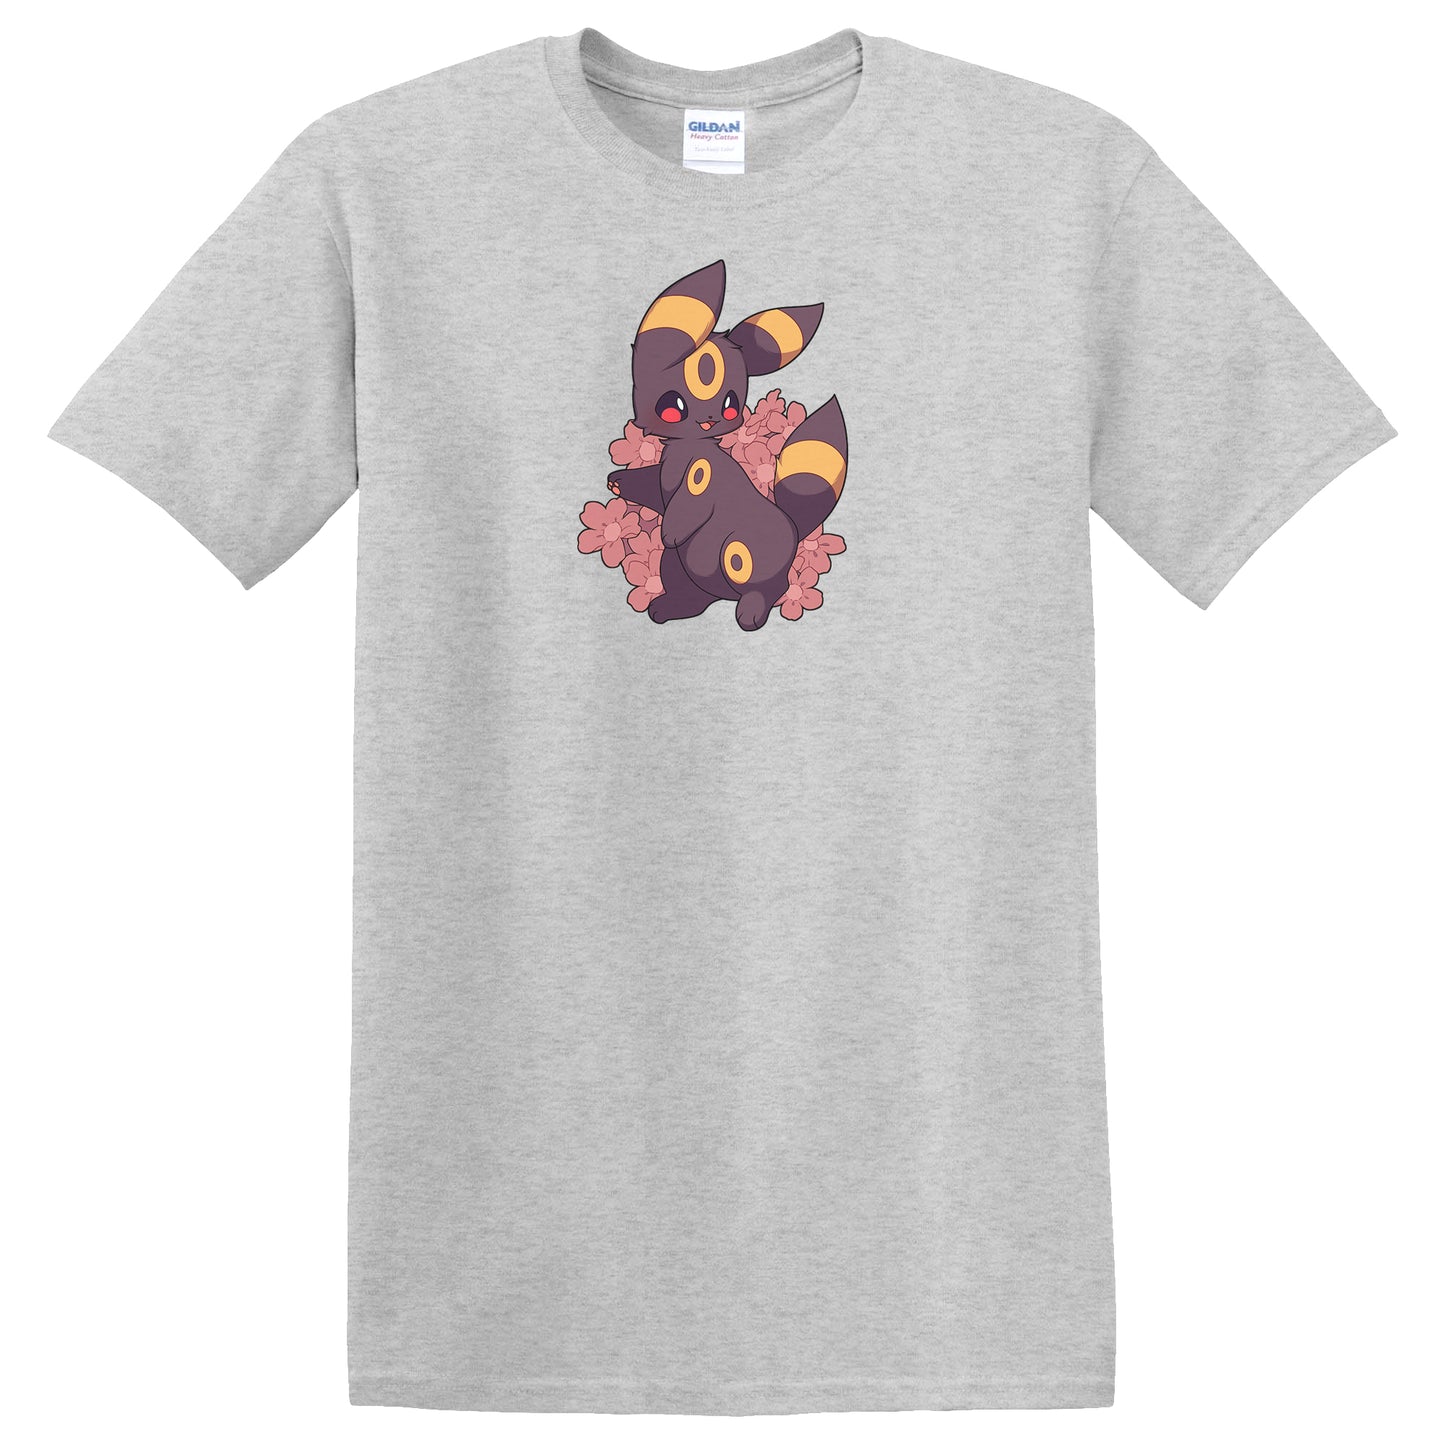 Umbreon with Flowers T-Shirt